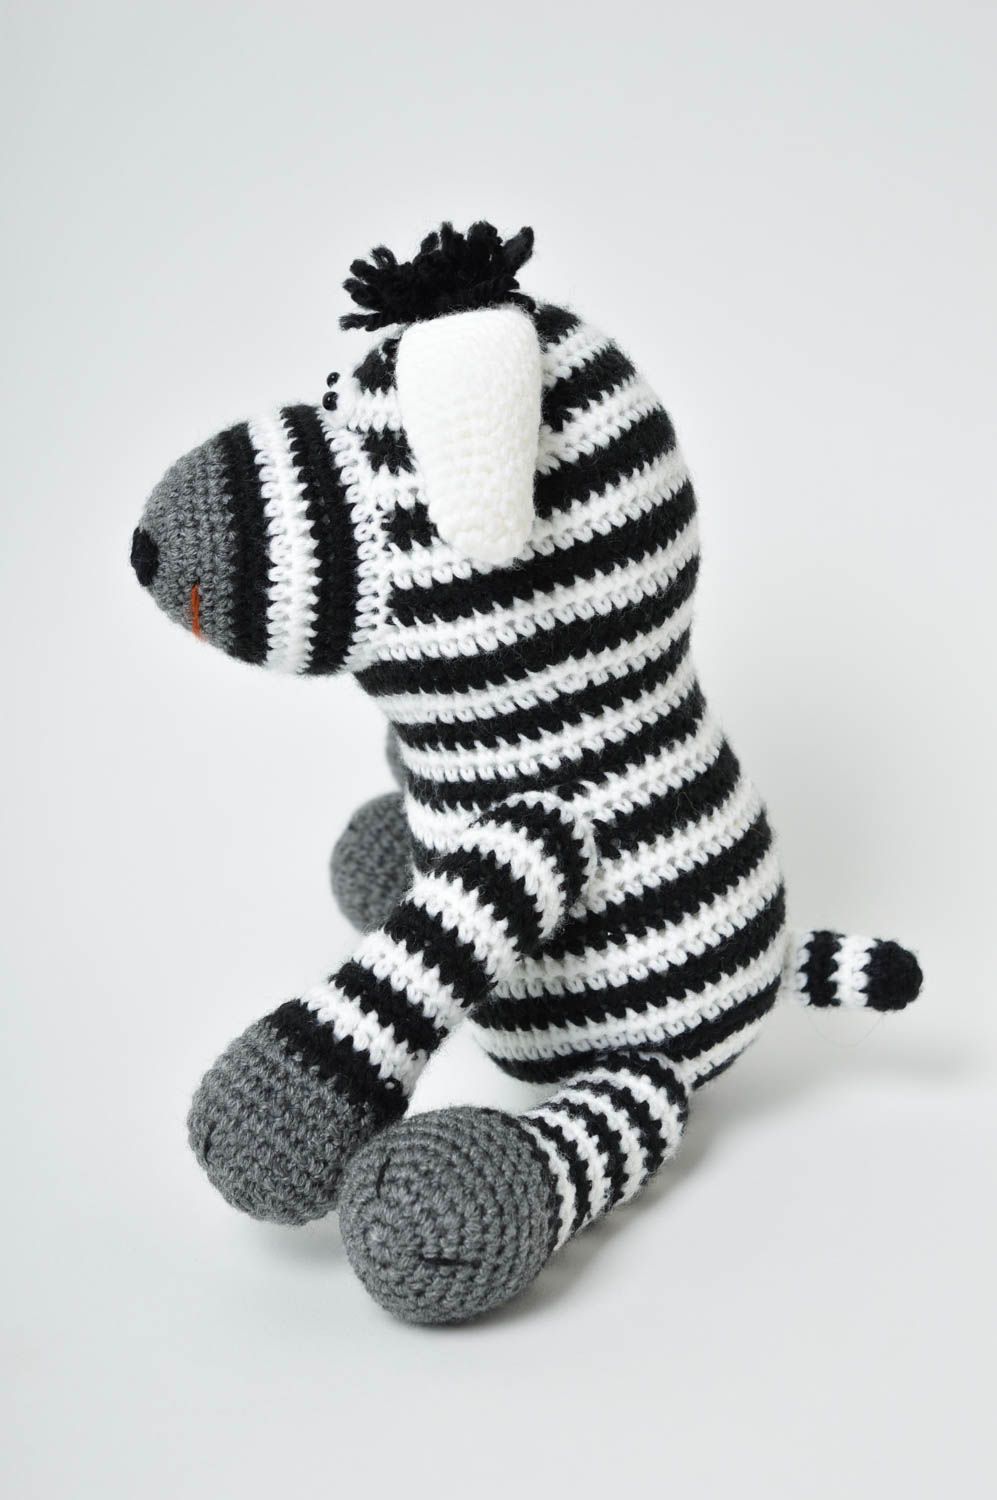 Handmade toy small zebra soft toy decorative crocheted toy striped crocheted toy photo 5